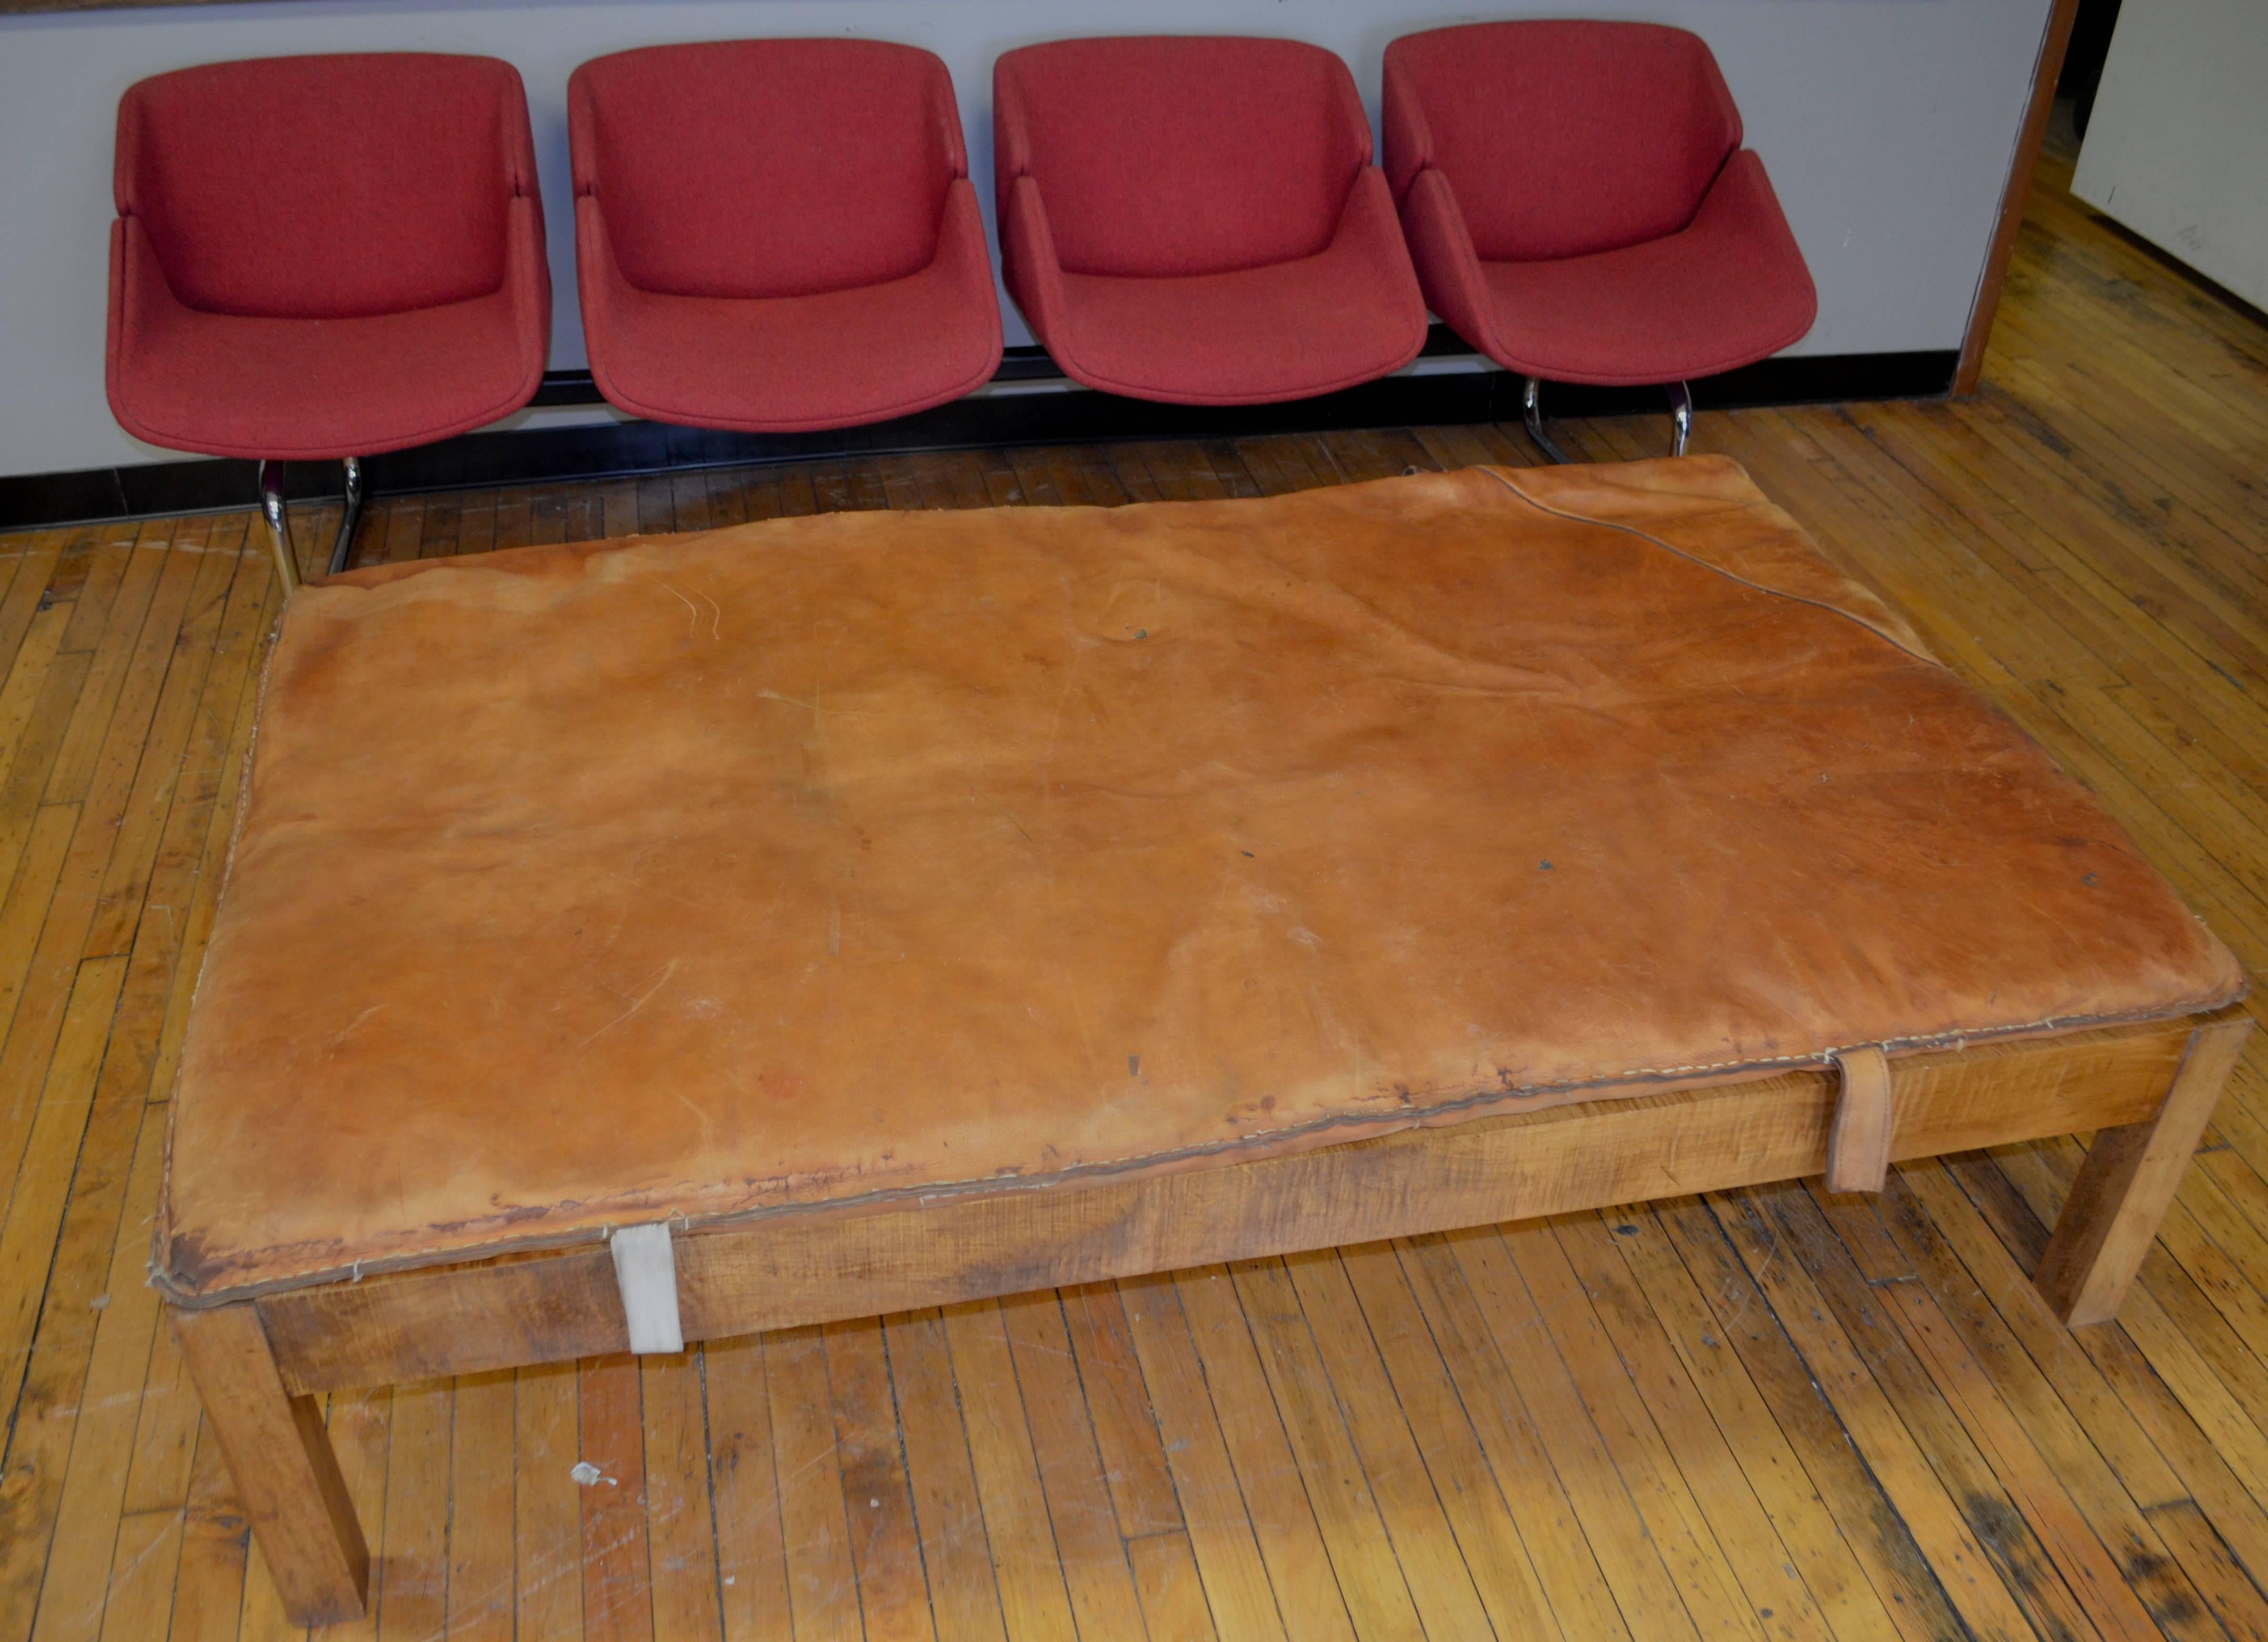 German Coffee Table/Ottoman with Vintage Gymnasium Leather Mat Atop Crafted Wood Frame